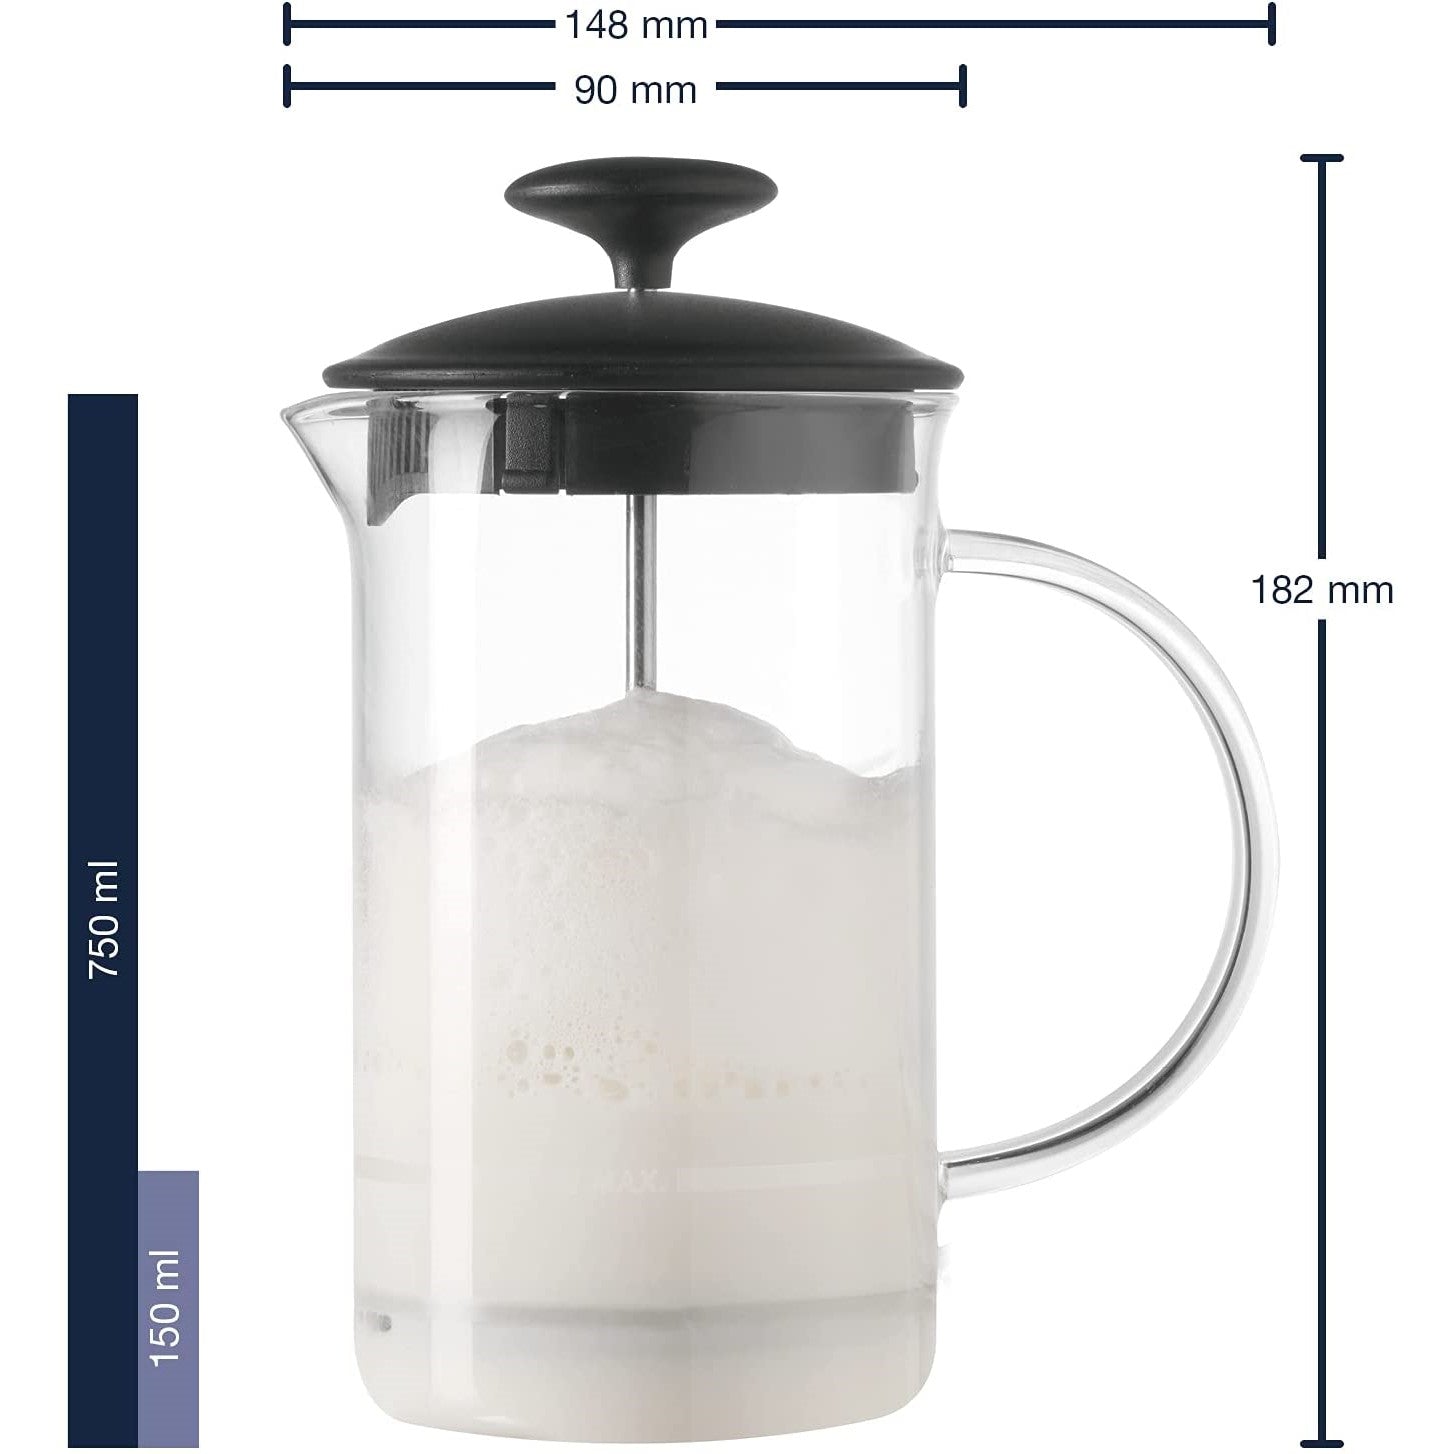 Leonardo CAFFEE PER ME Cappuccino Milk Frother with Plunger Mechanism750ml